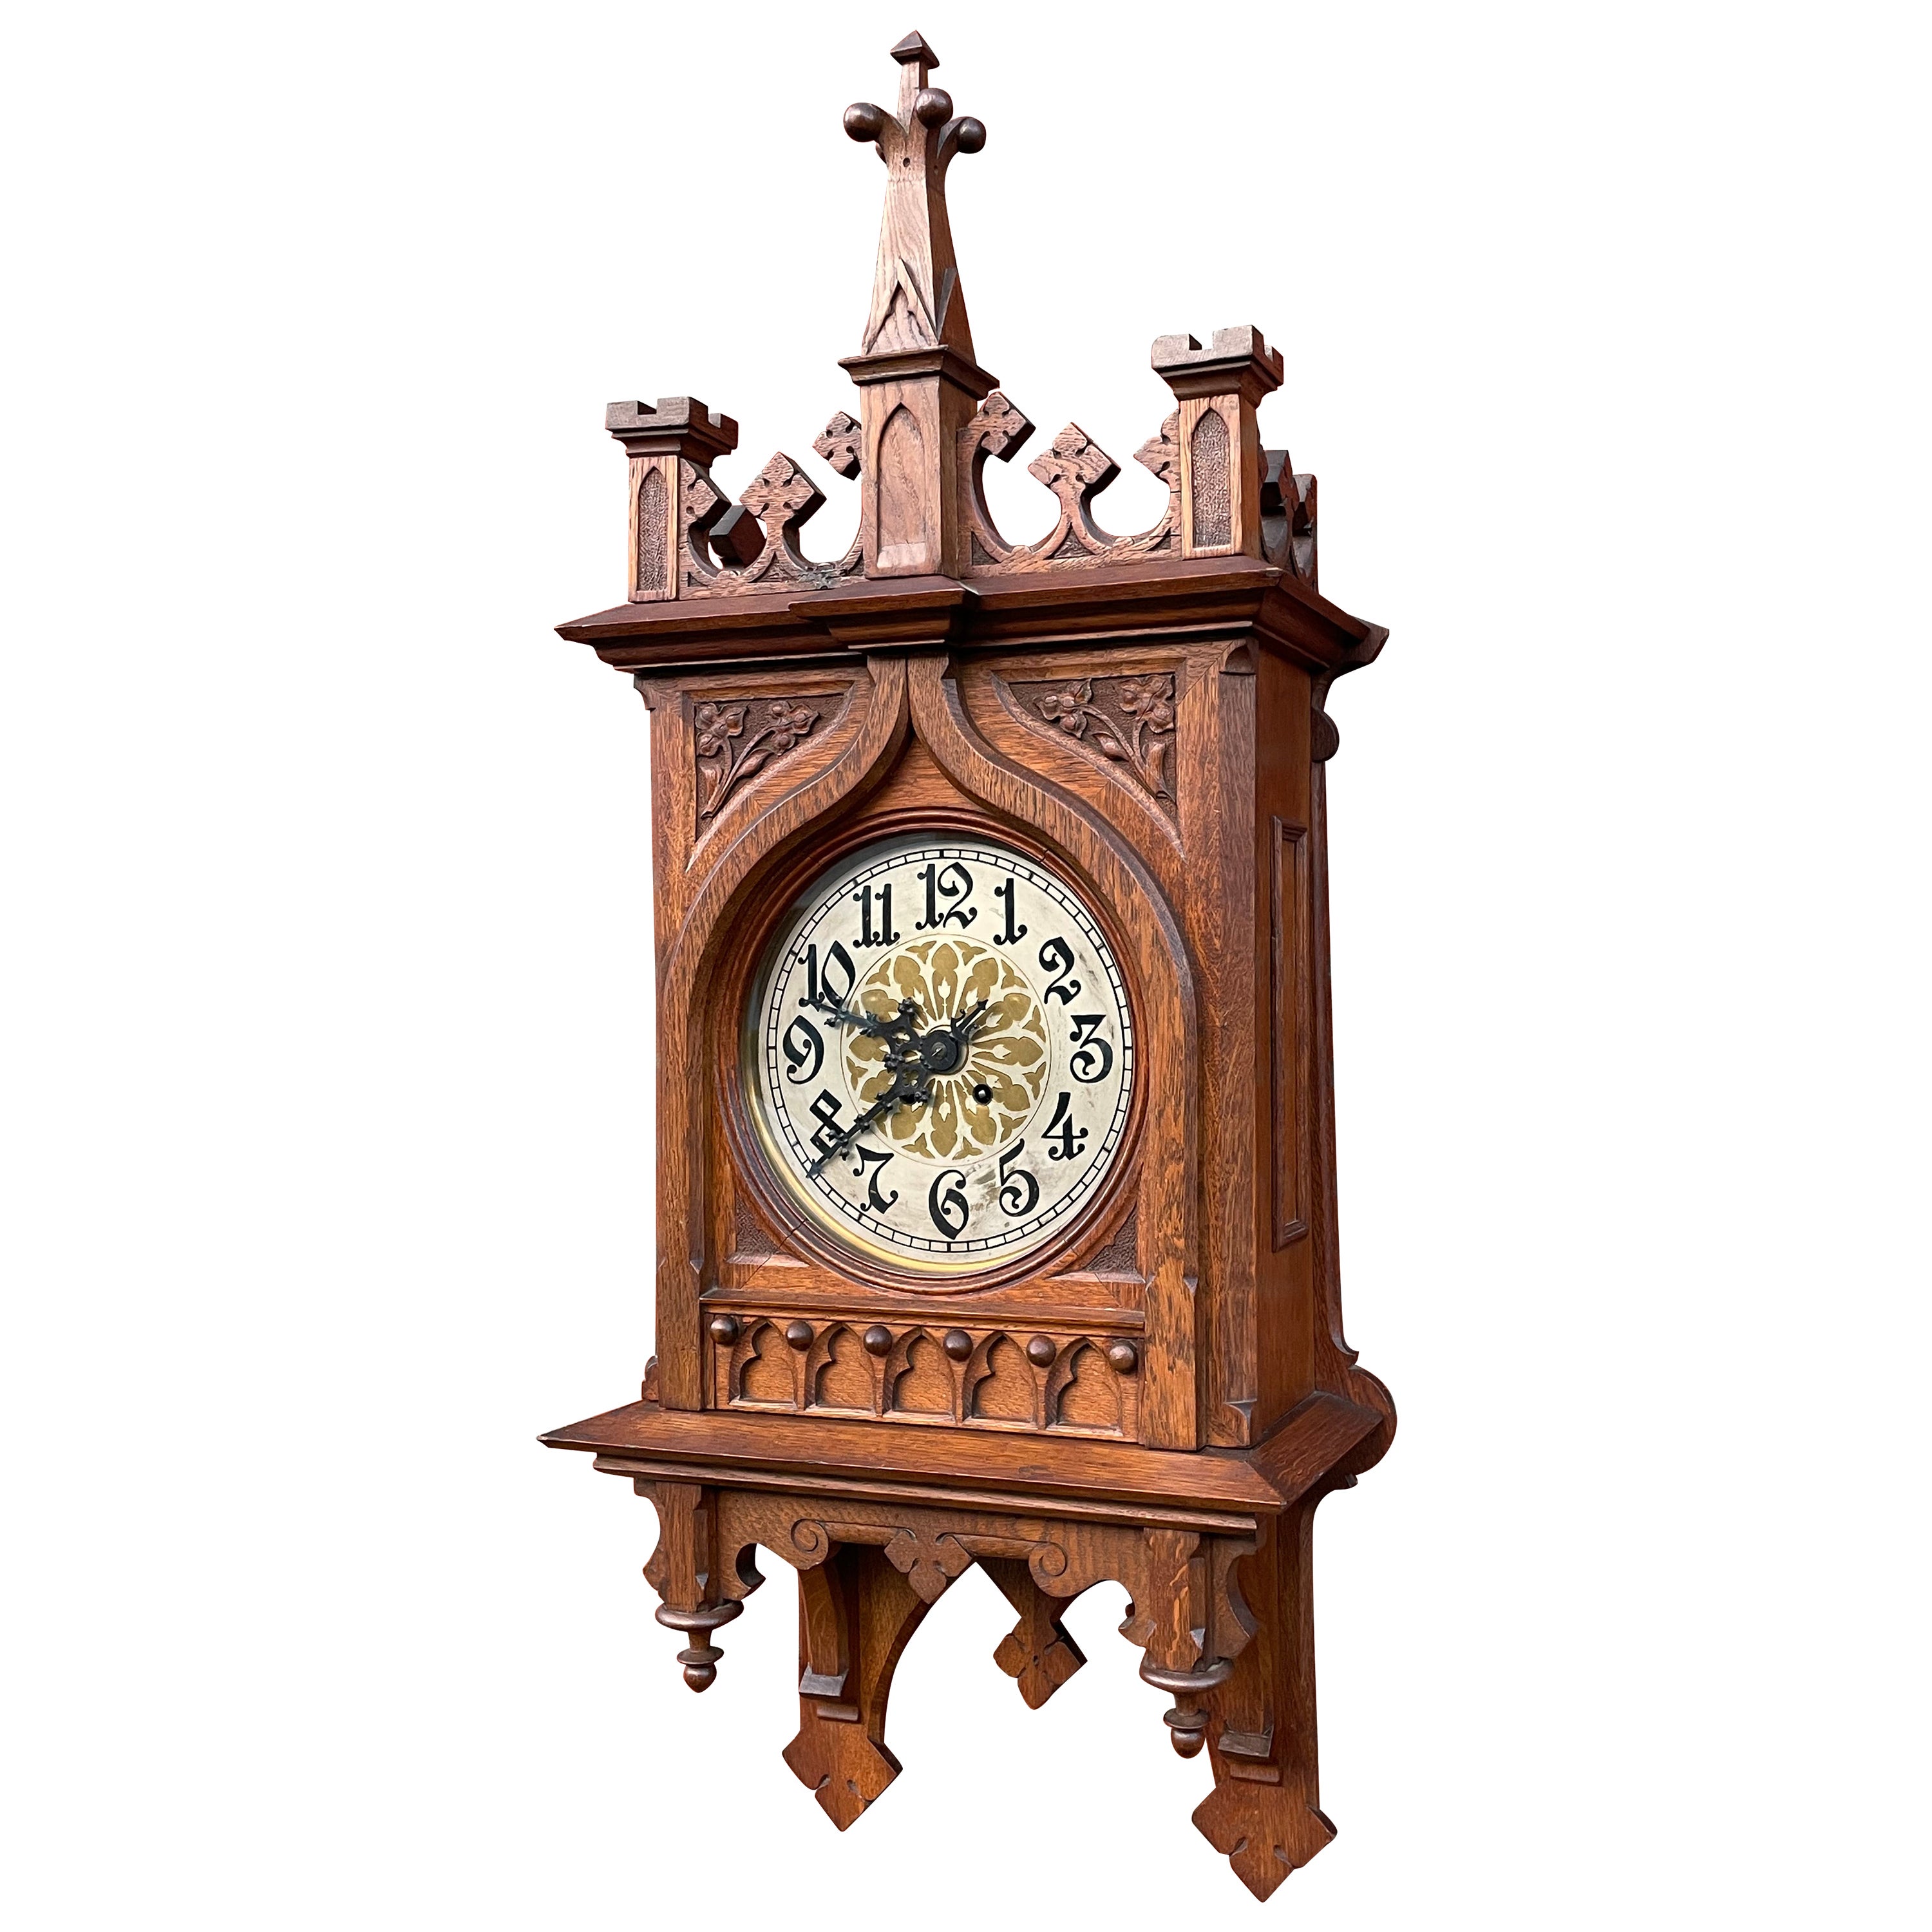 Rare & Large Antique Hand Carved Gothic Revival Wall Clock w. Lenzkirch Movement For Sale